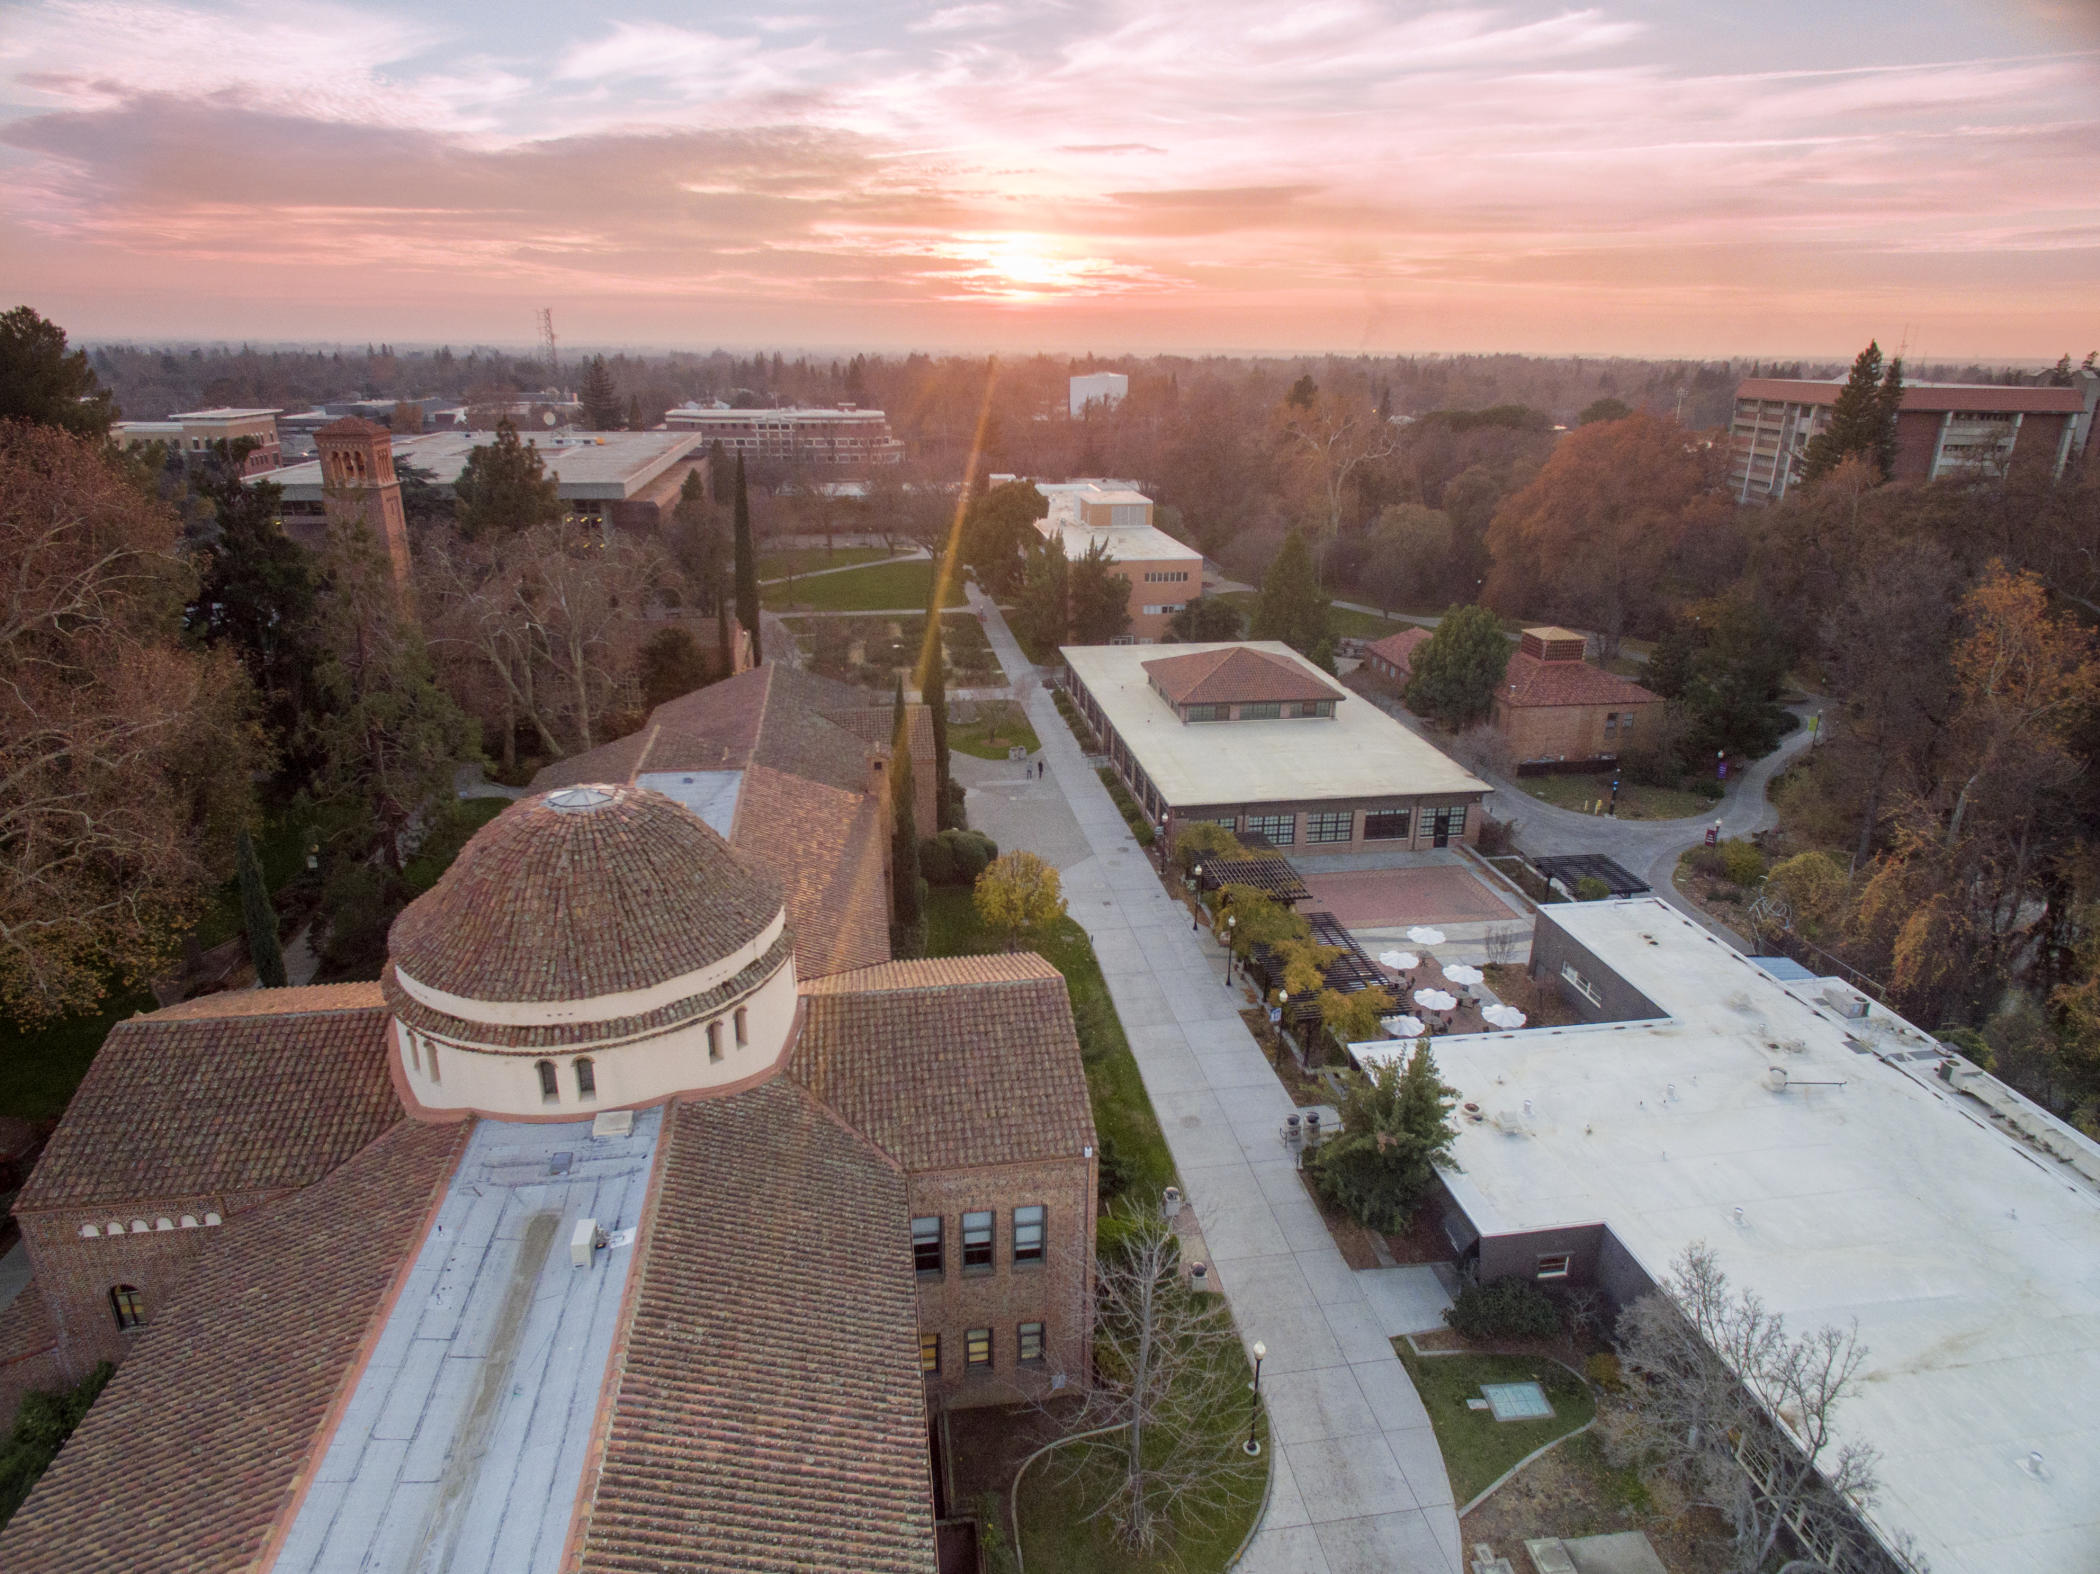 The sun sets over campus during the late fall months of 2017.